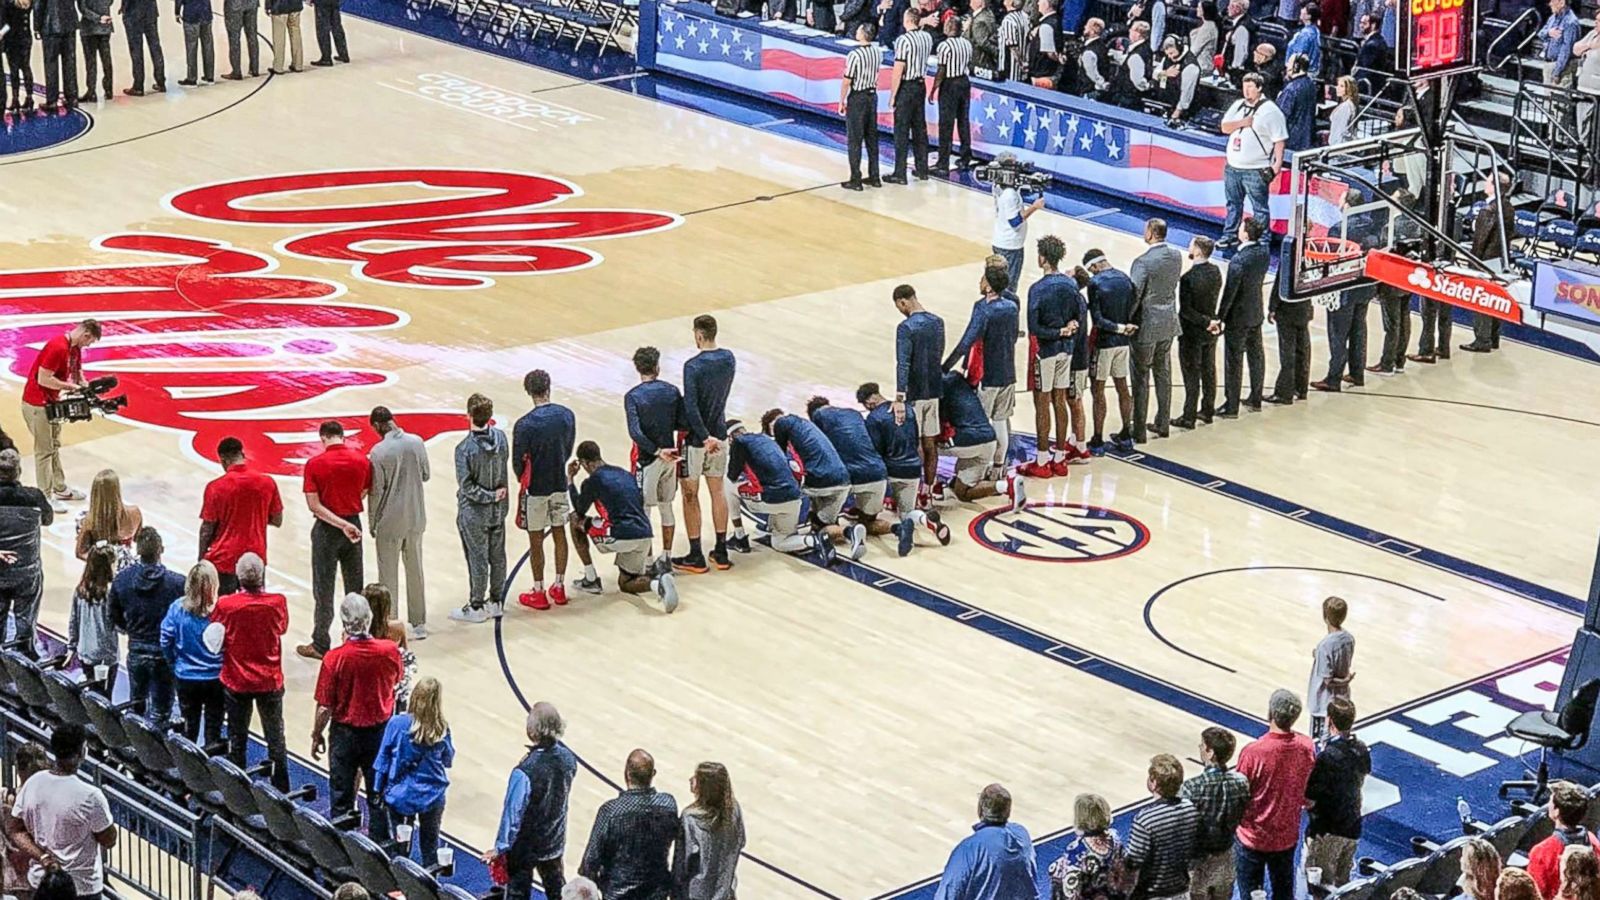 Ole Miss basketball players kneel during national anthem to